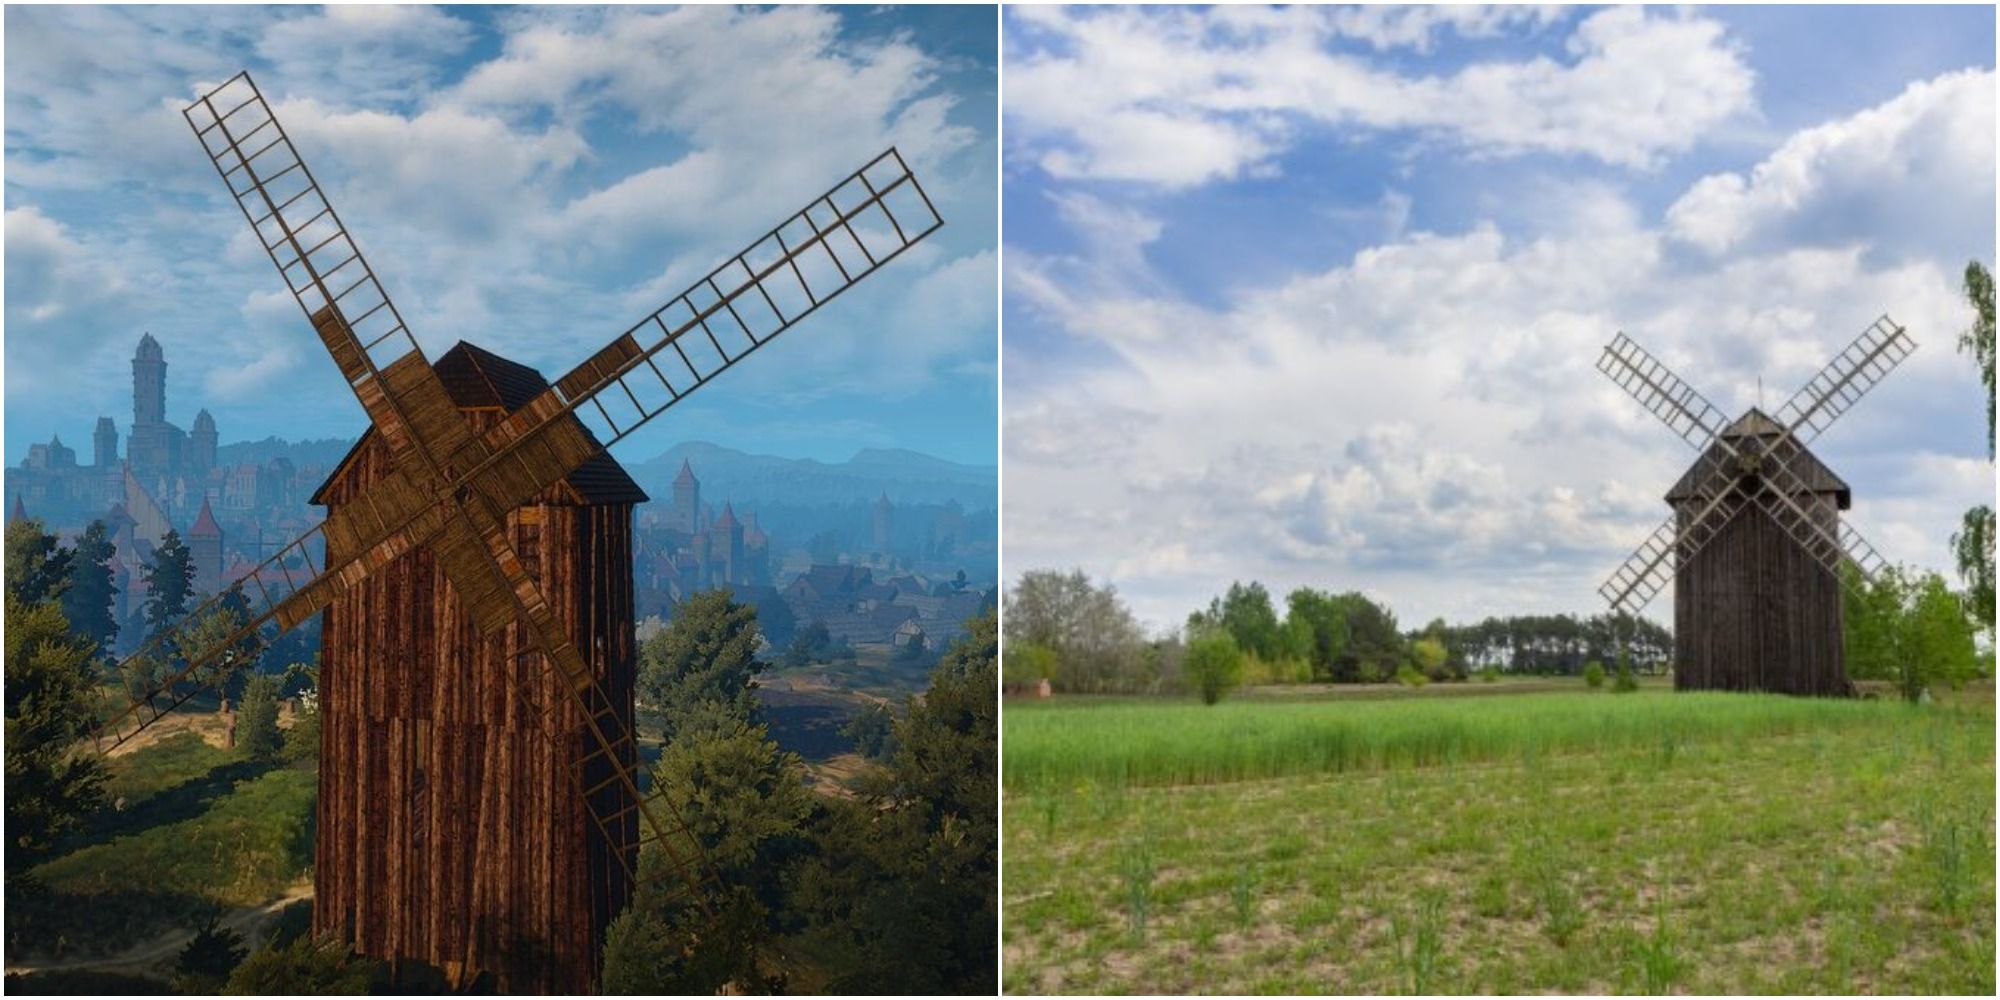 Windmills from The Witcher 3 and in Poland in open fields